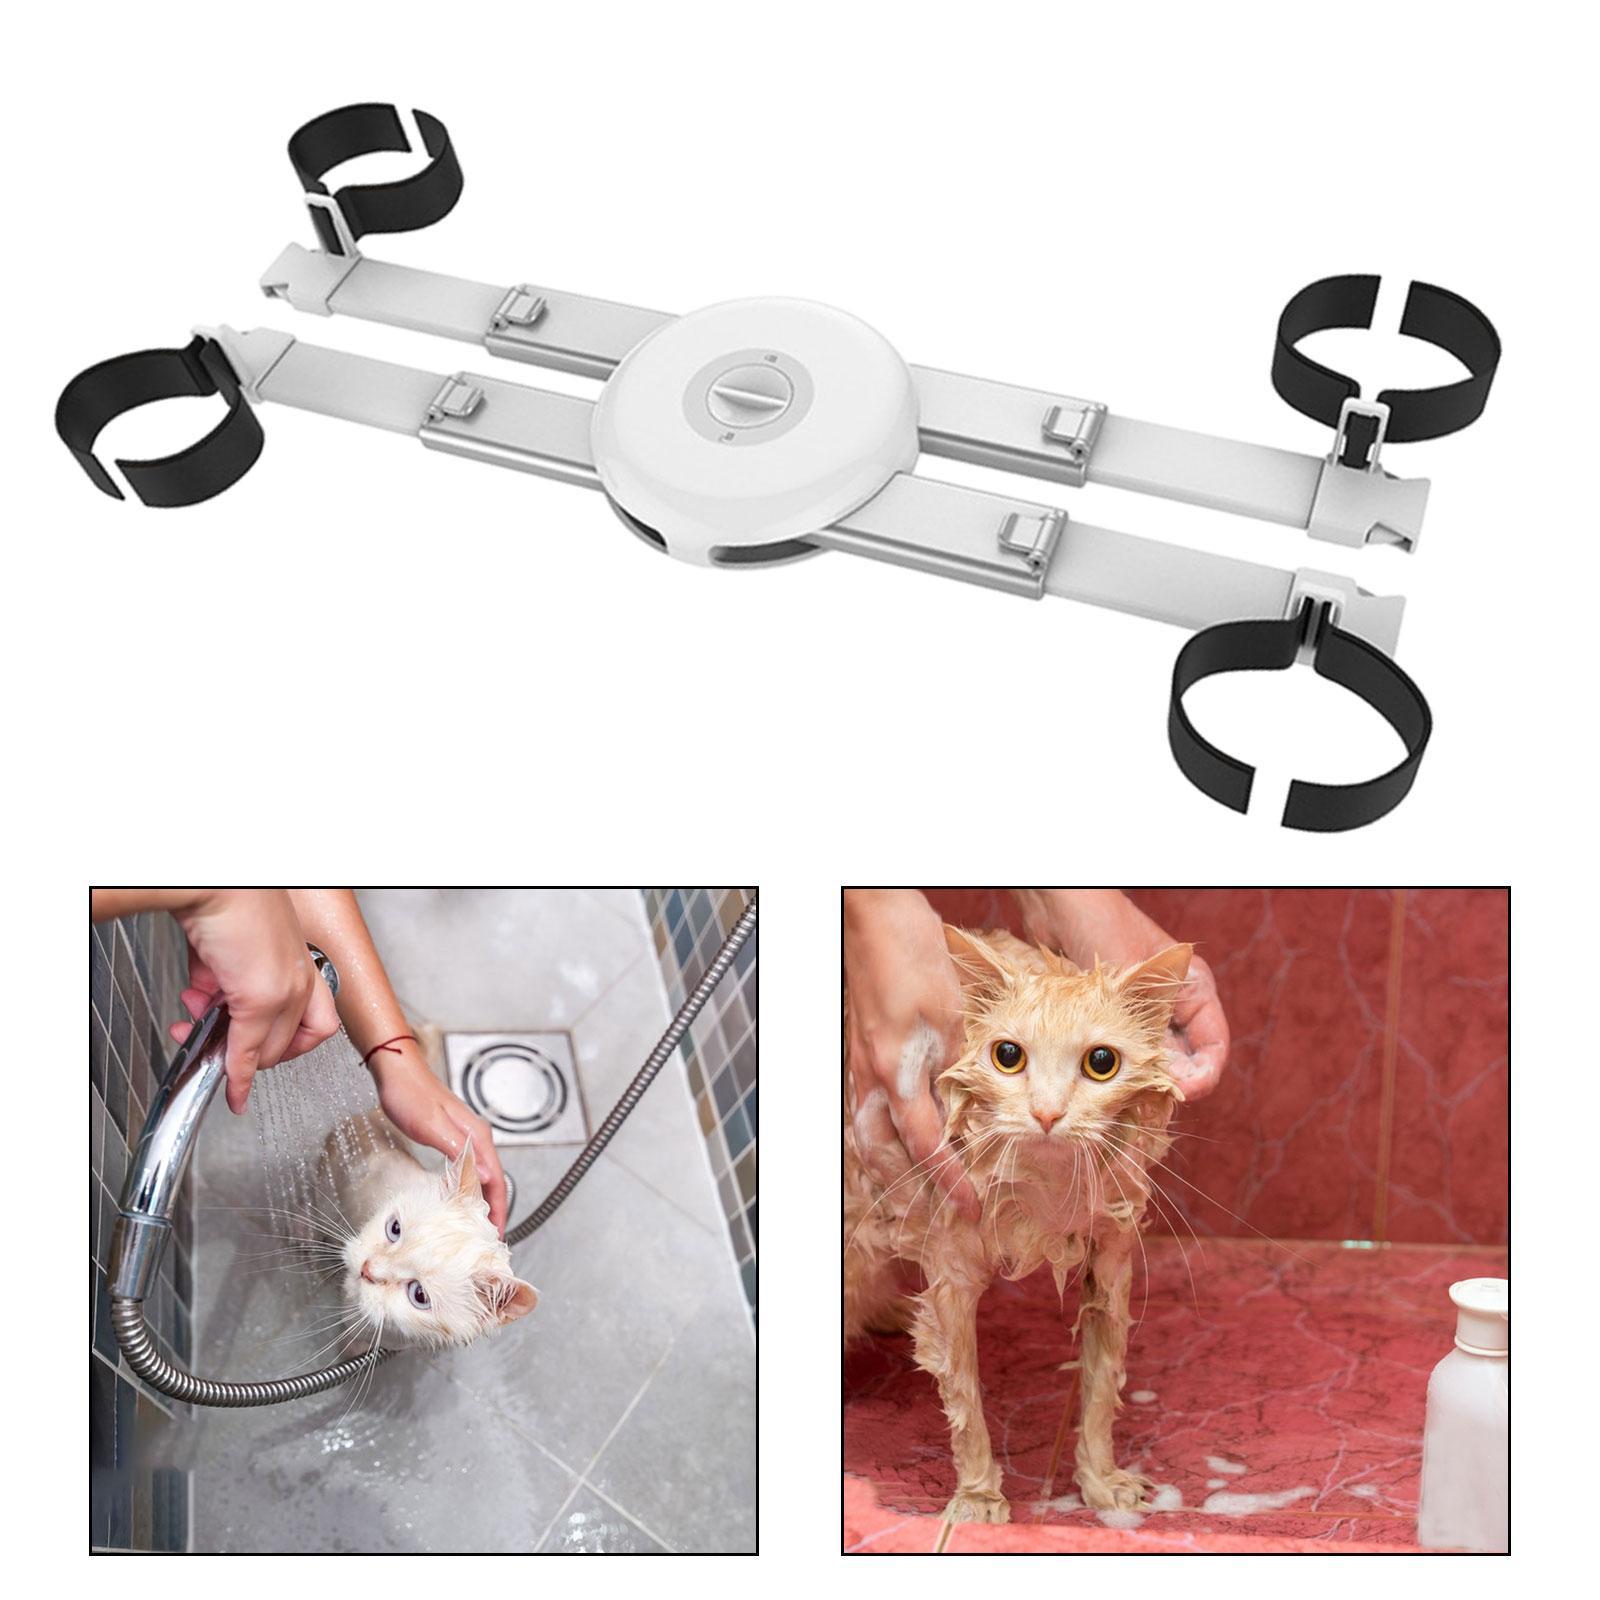 Pet Fixing Bracket Retractable Pet Grooming Holder for Kitty Showering Puppy